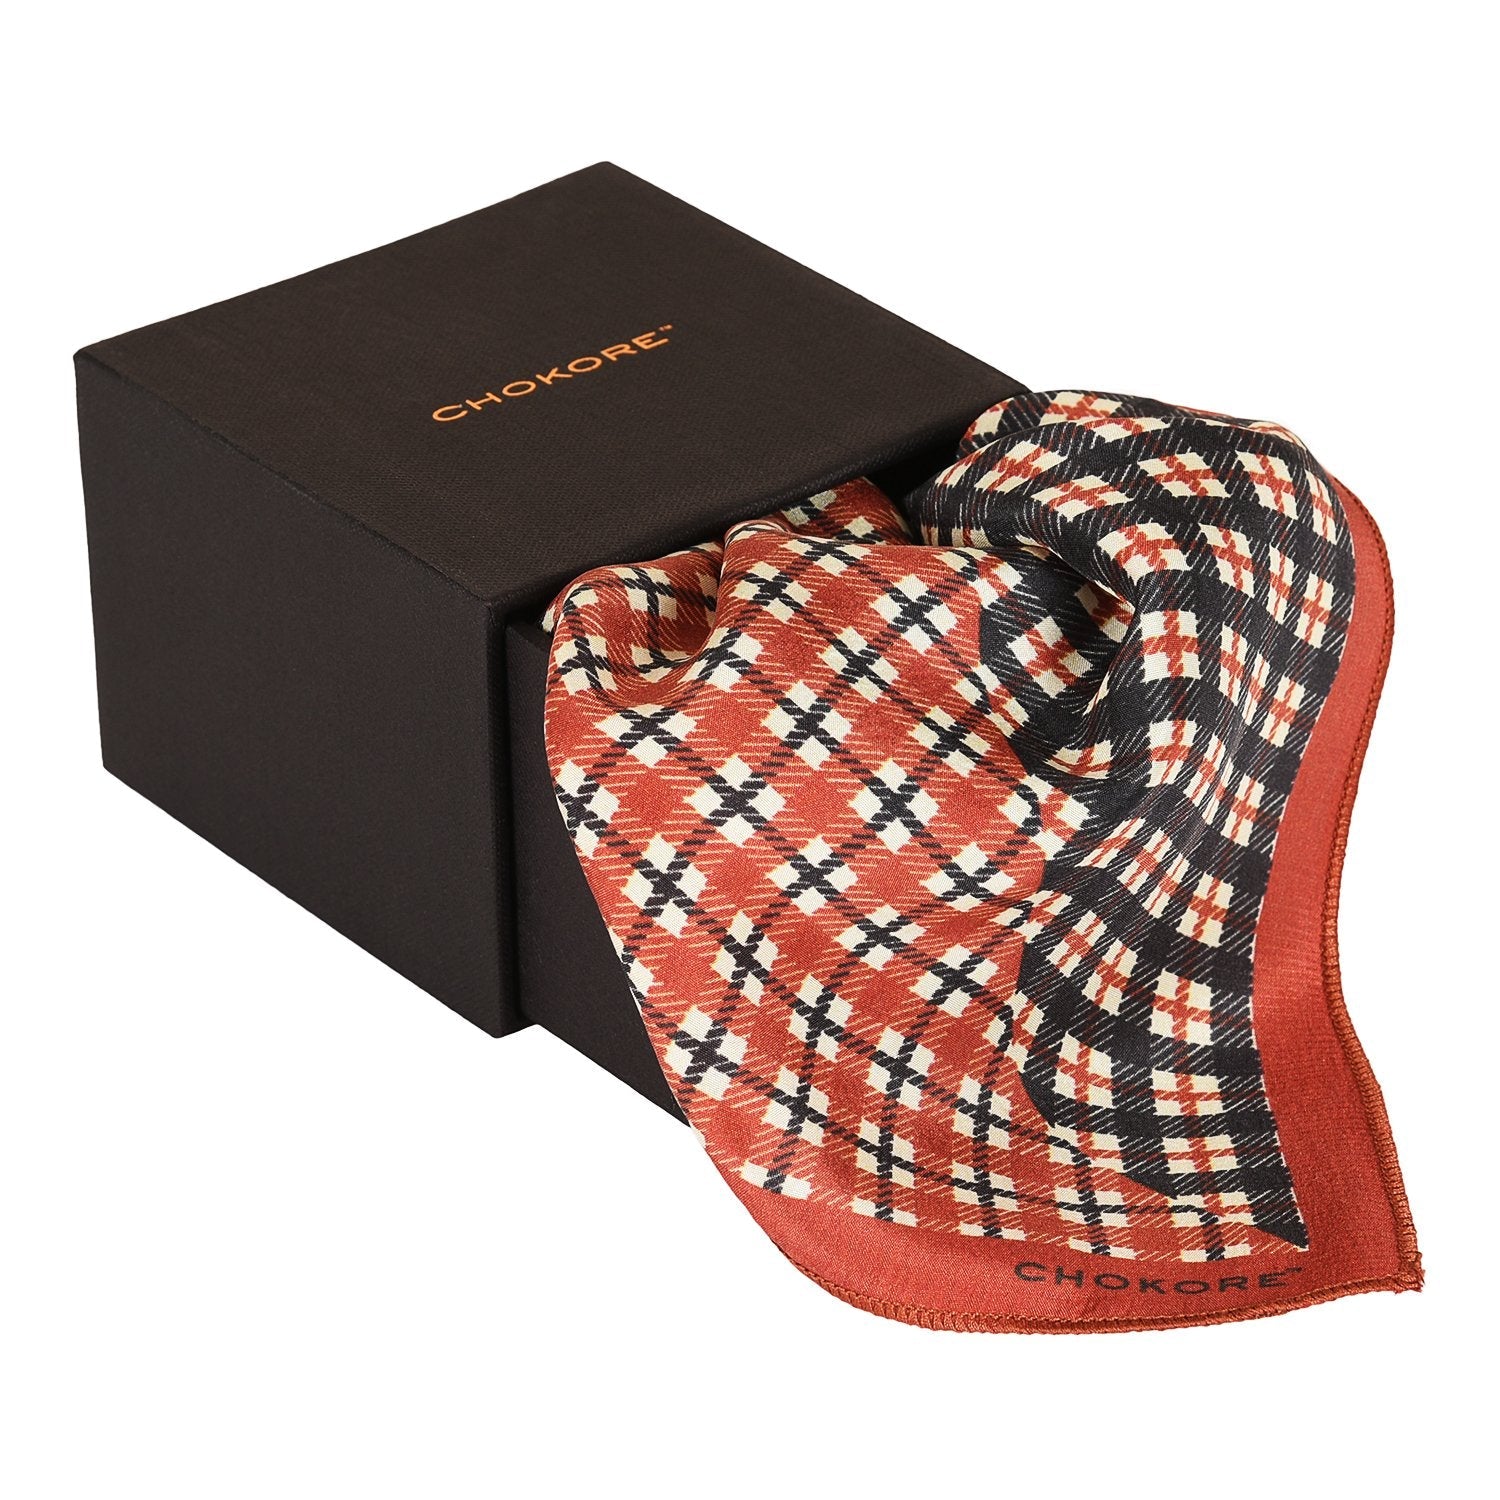 Chokore Pocket square in Two-in-One red and black from the Plaids line